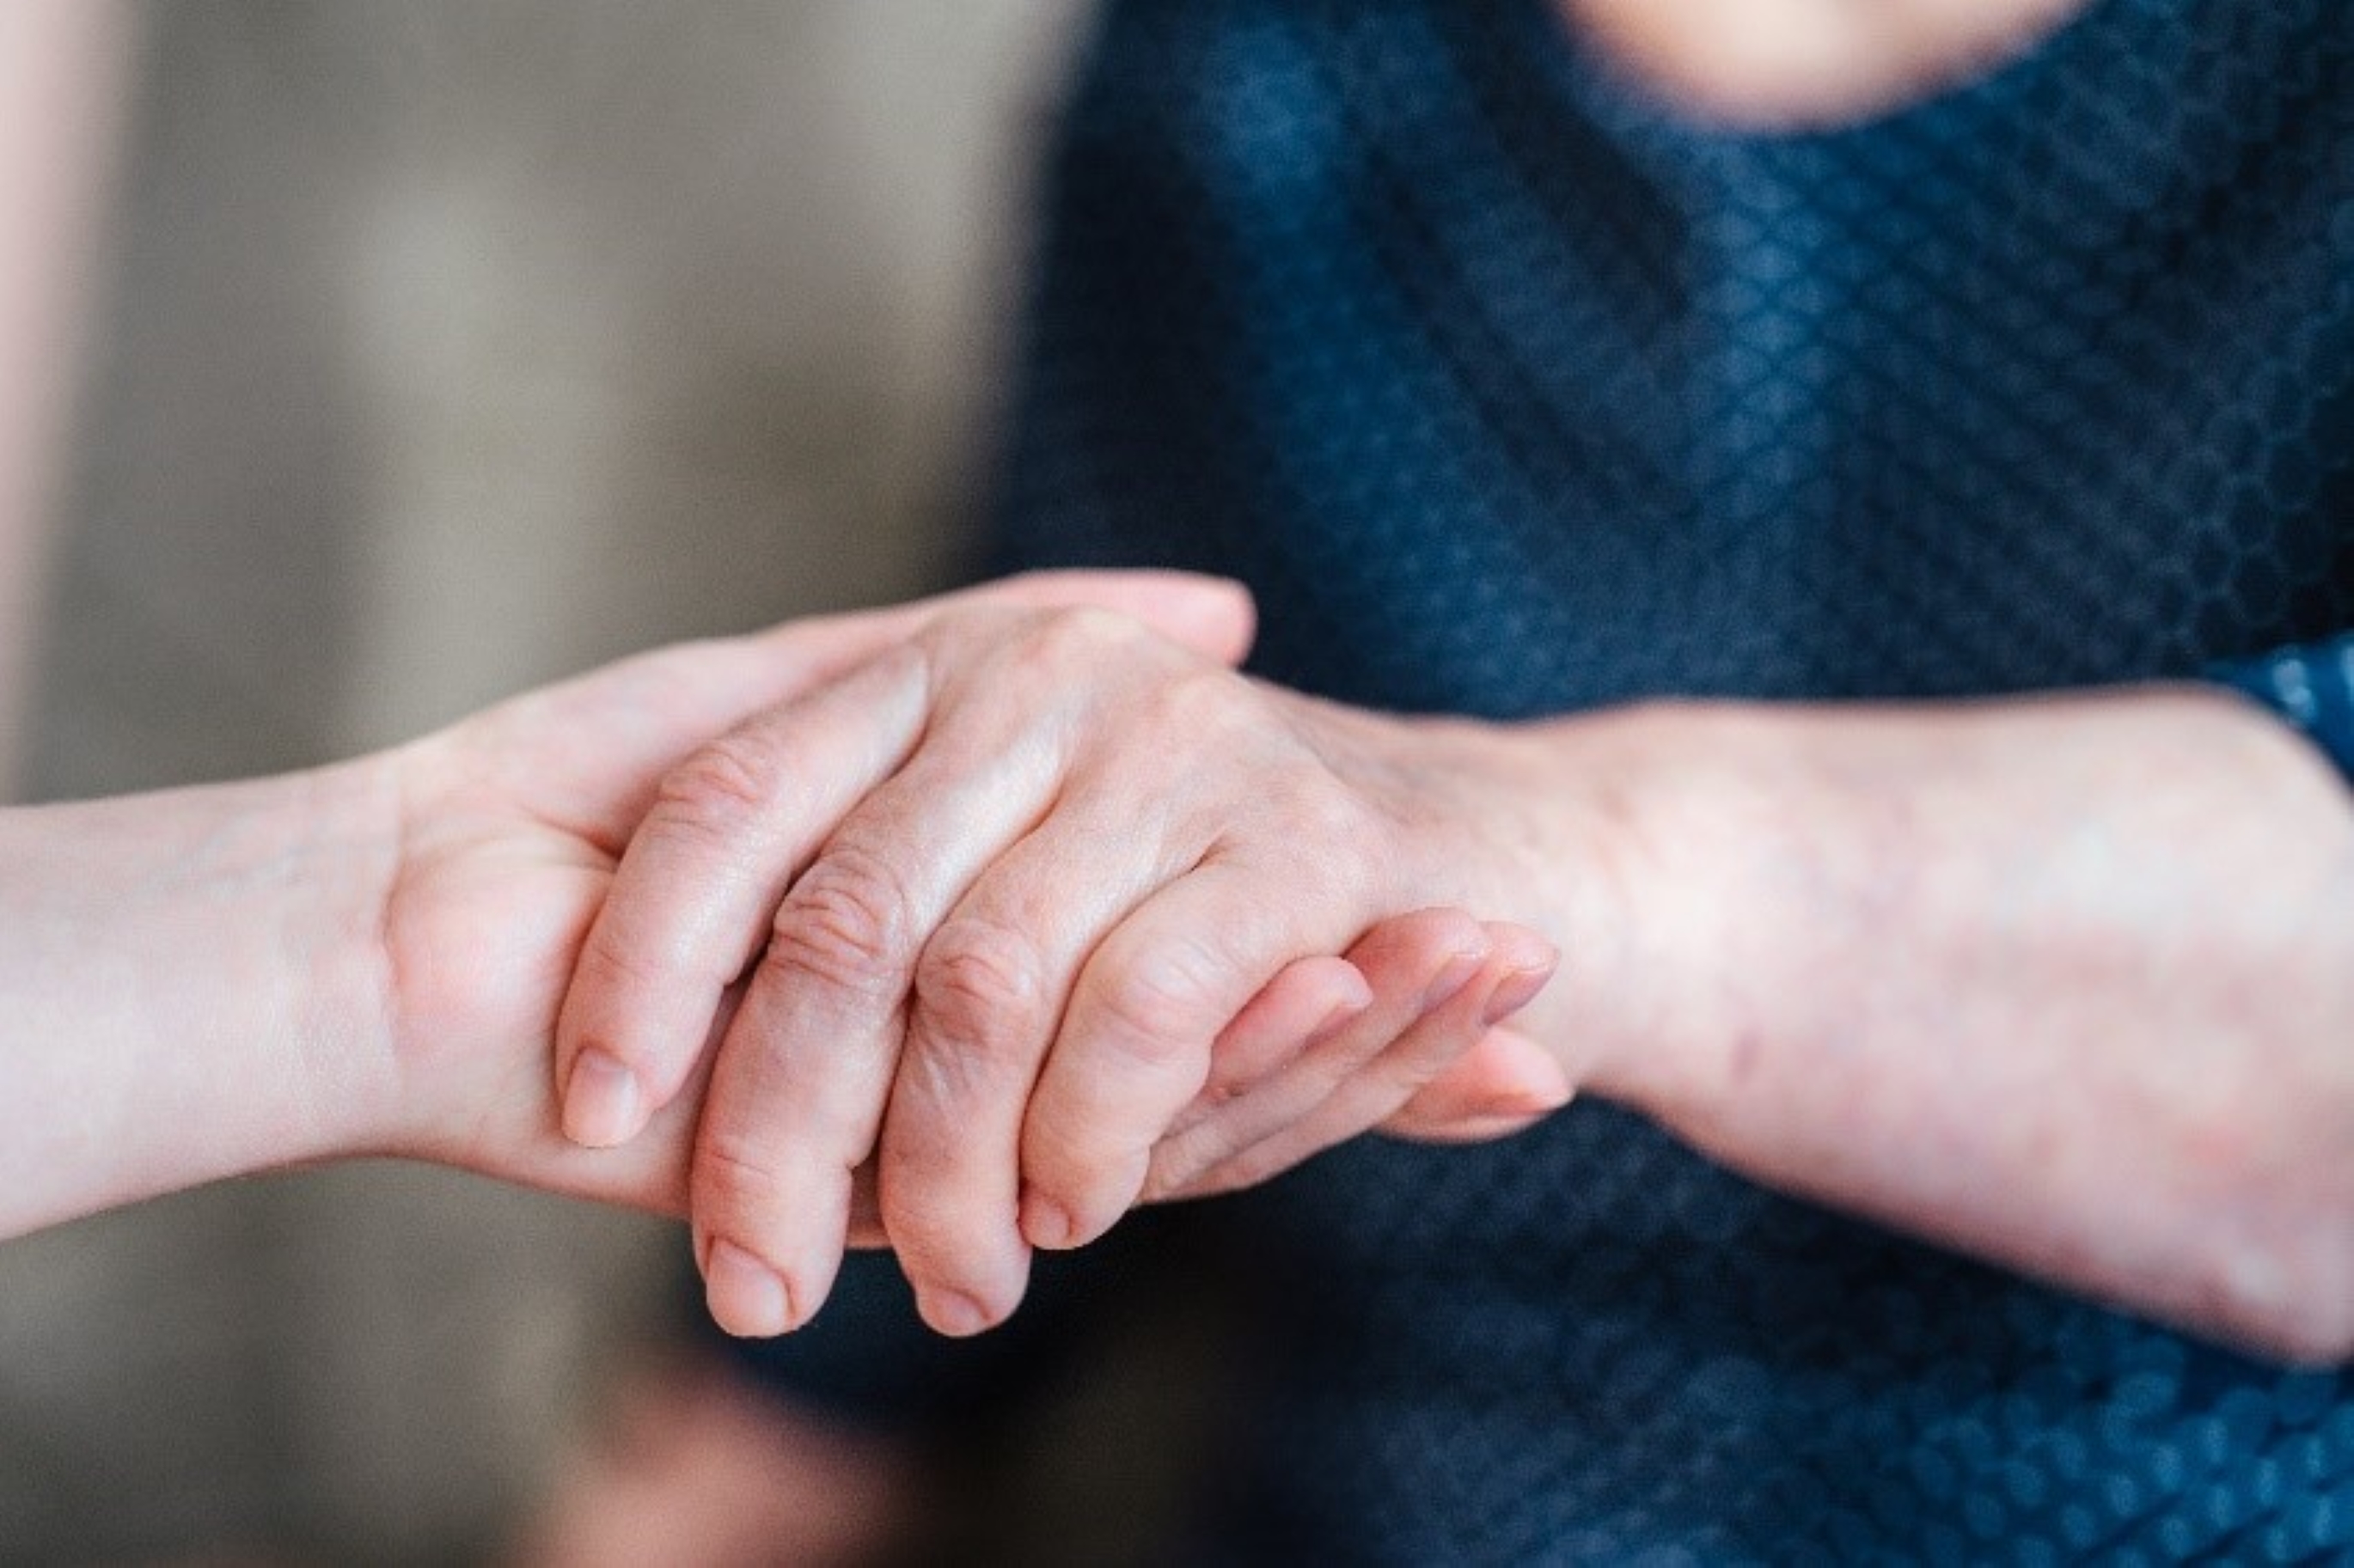 Two hands, belonging to people of different ages, reach out, holding each other.